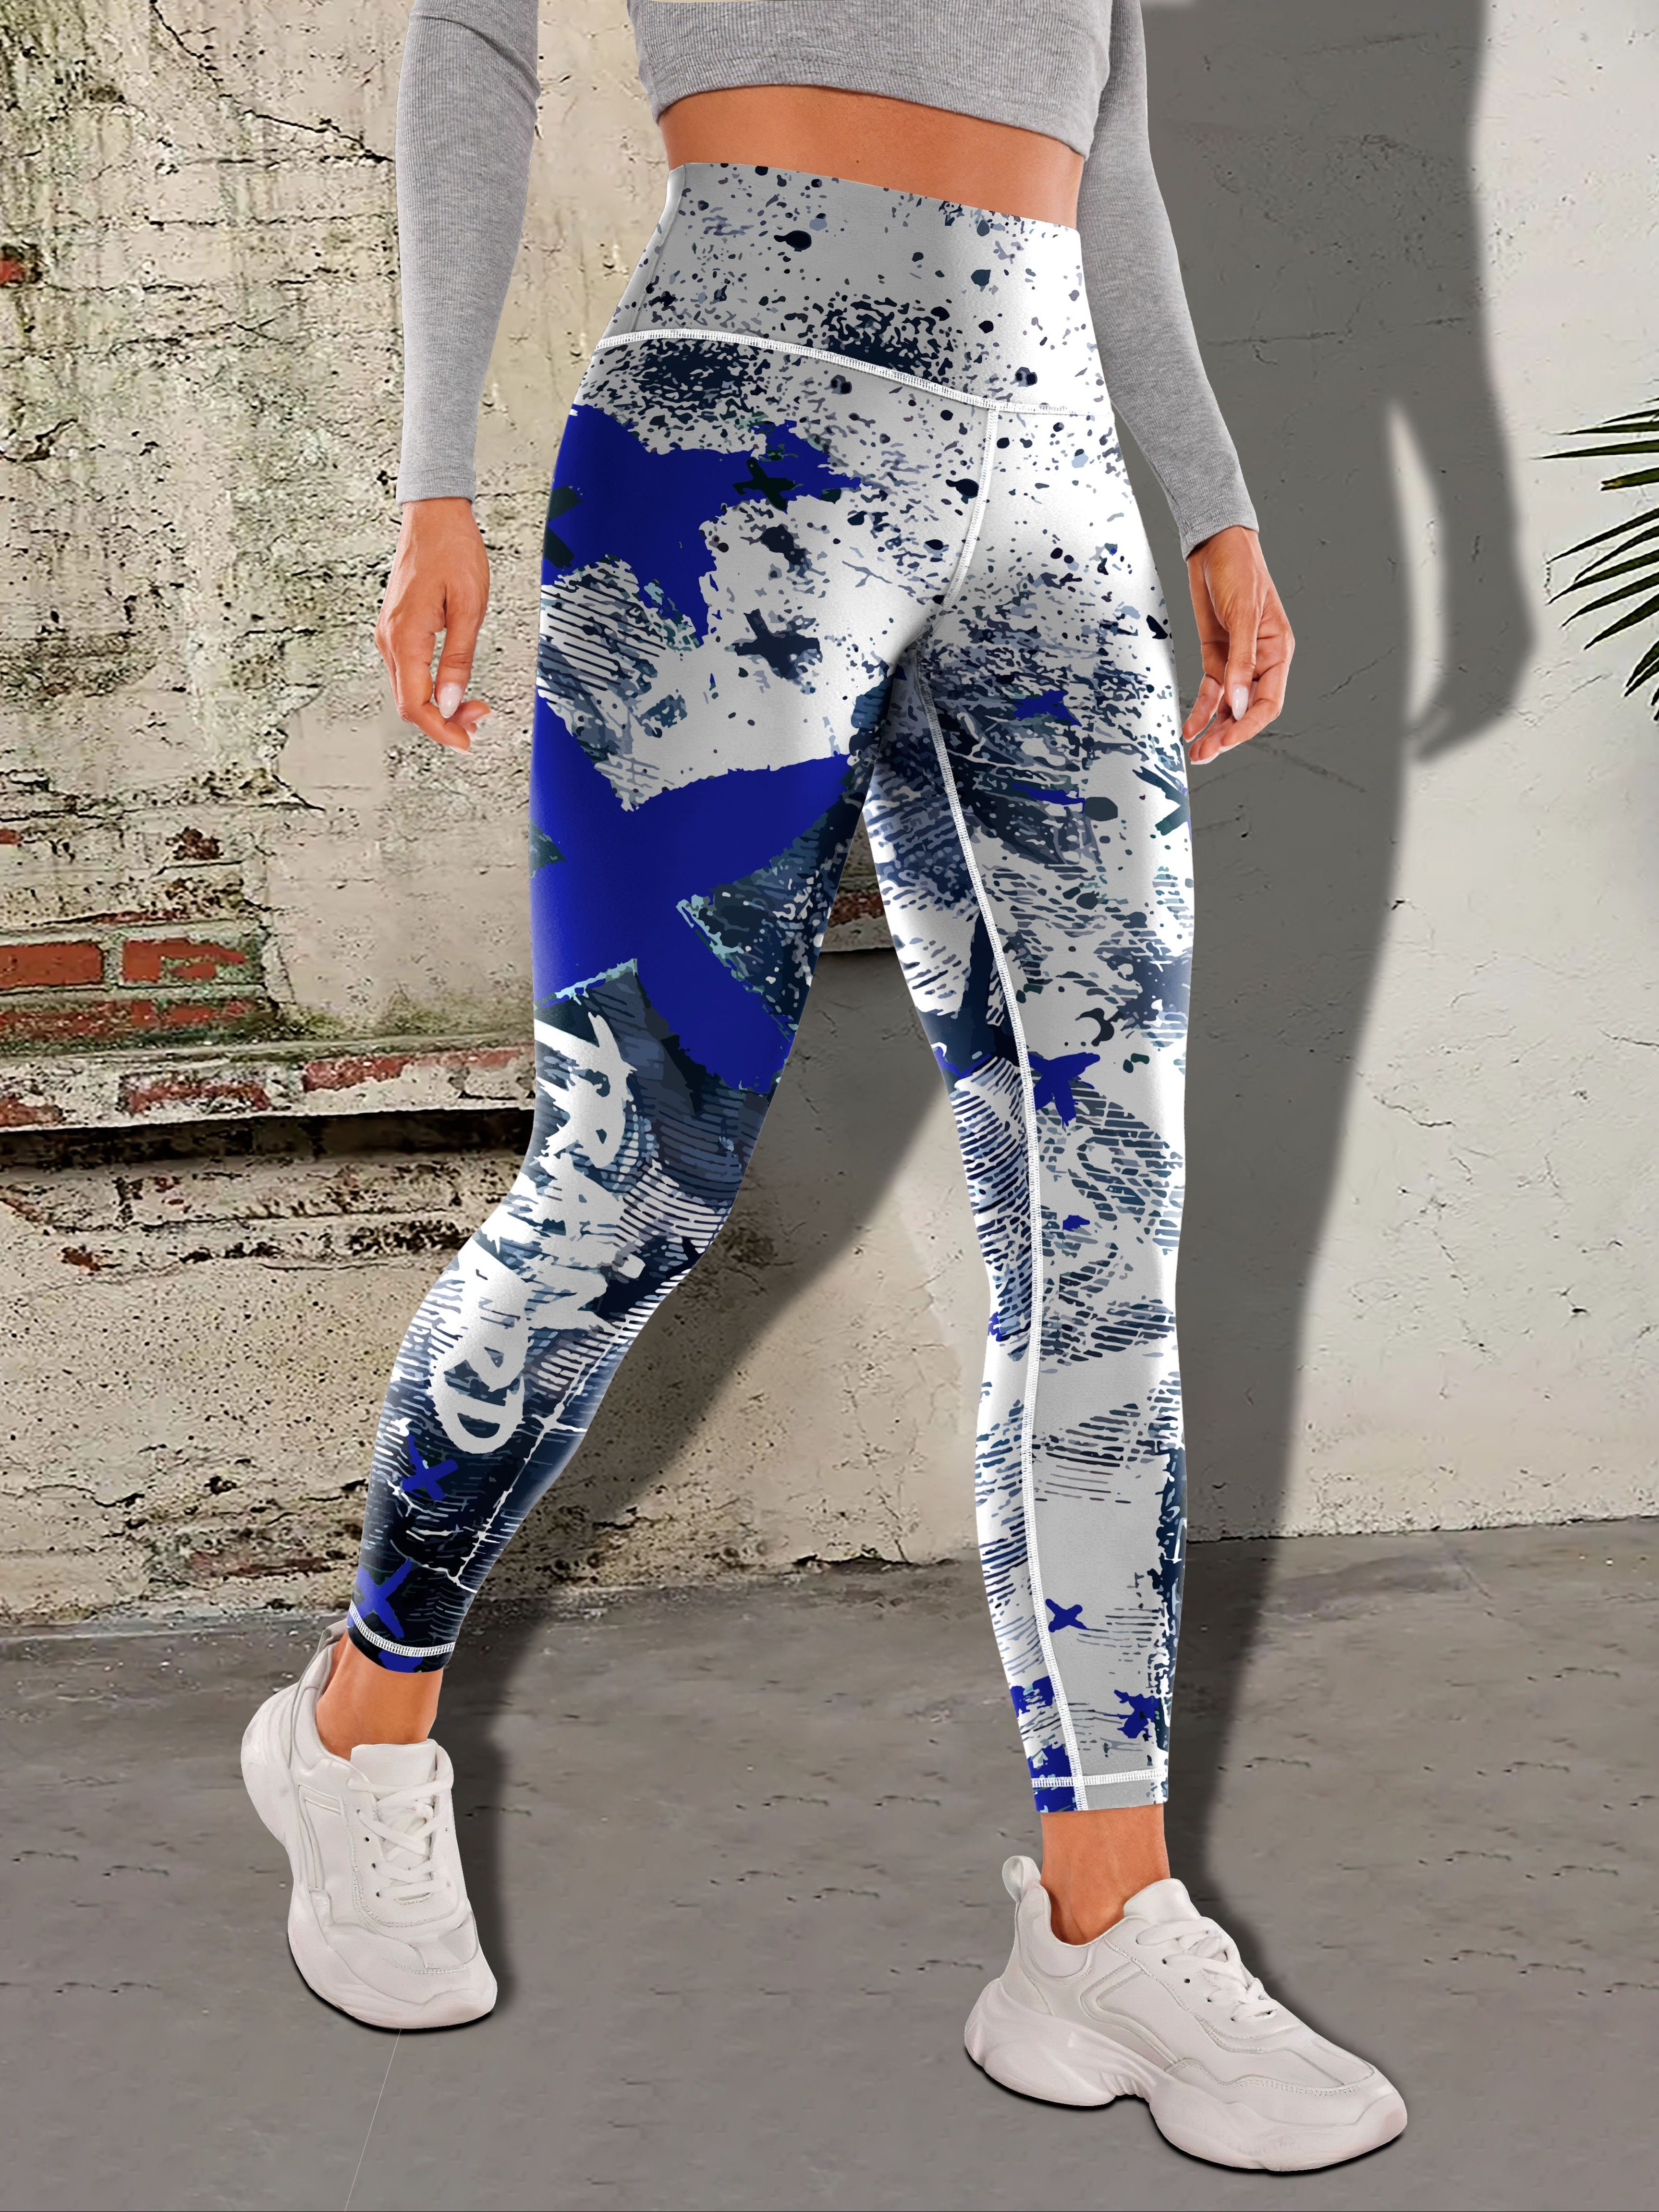 Logo Printed Double-knit Airlift Fabric High-waist Suit Up Leggings  Smoothing Cool Piping Women Yoga Pants